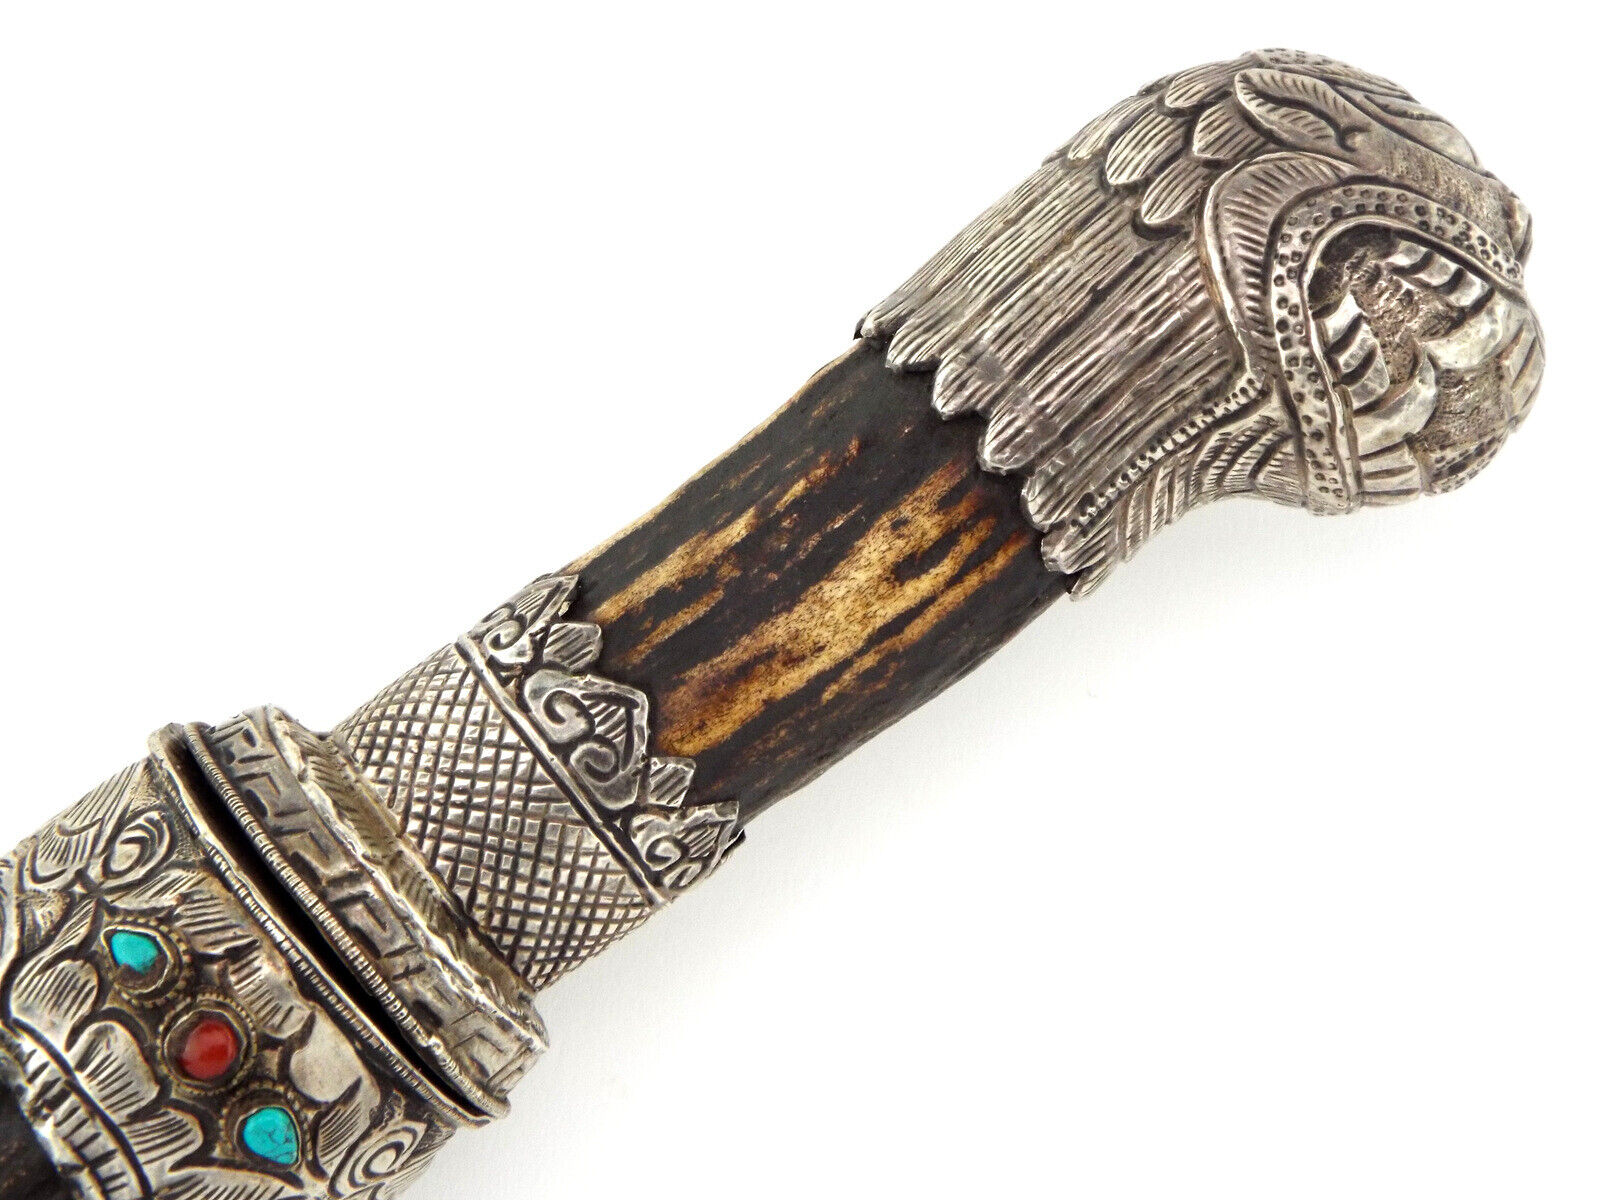 Fine Quality 19C. Chinese or Mongolian Jeweled and Silver Mounted Dagger Knife